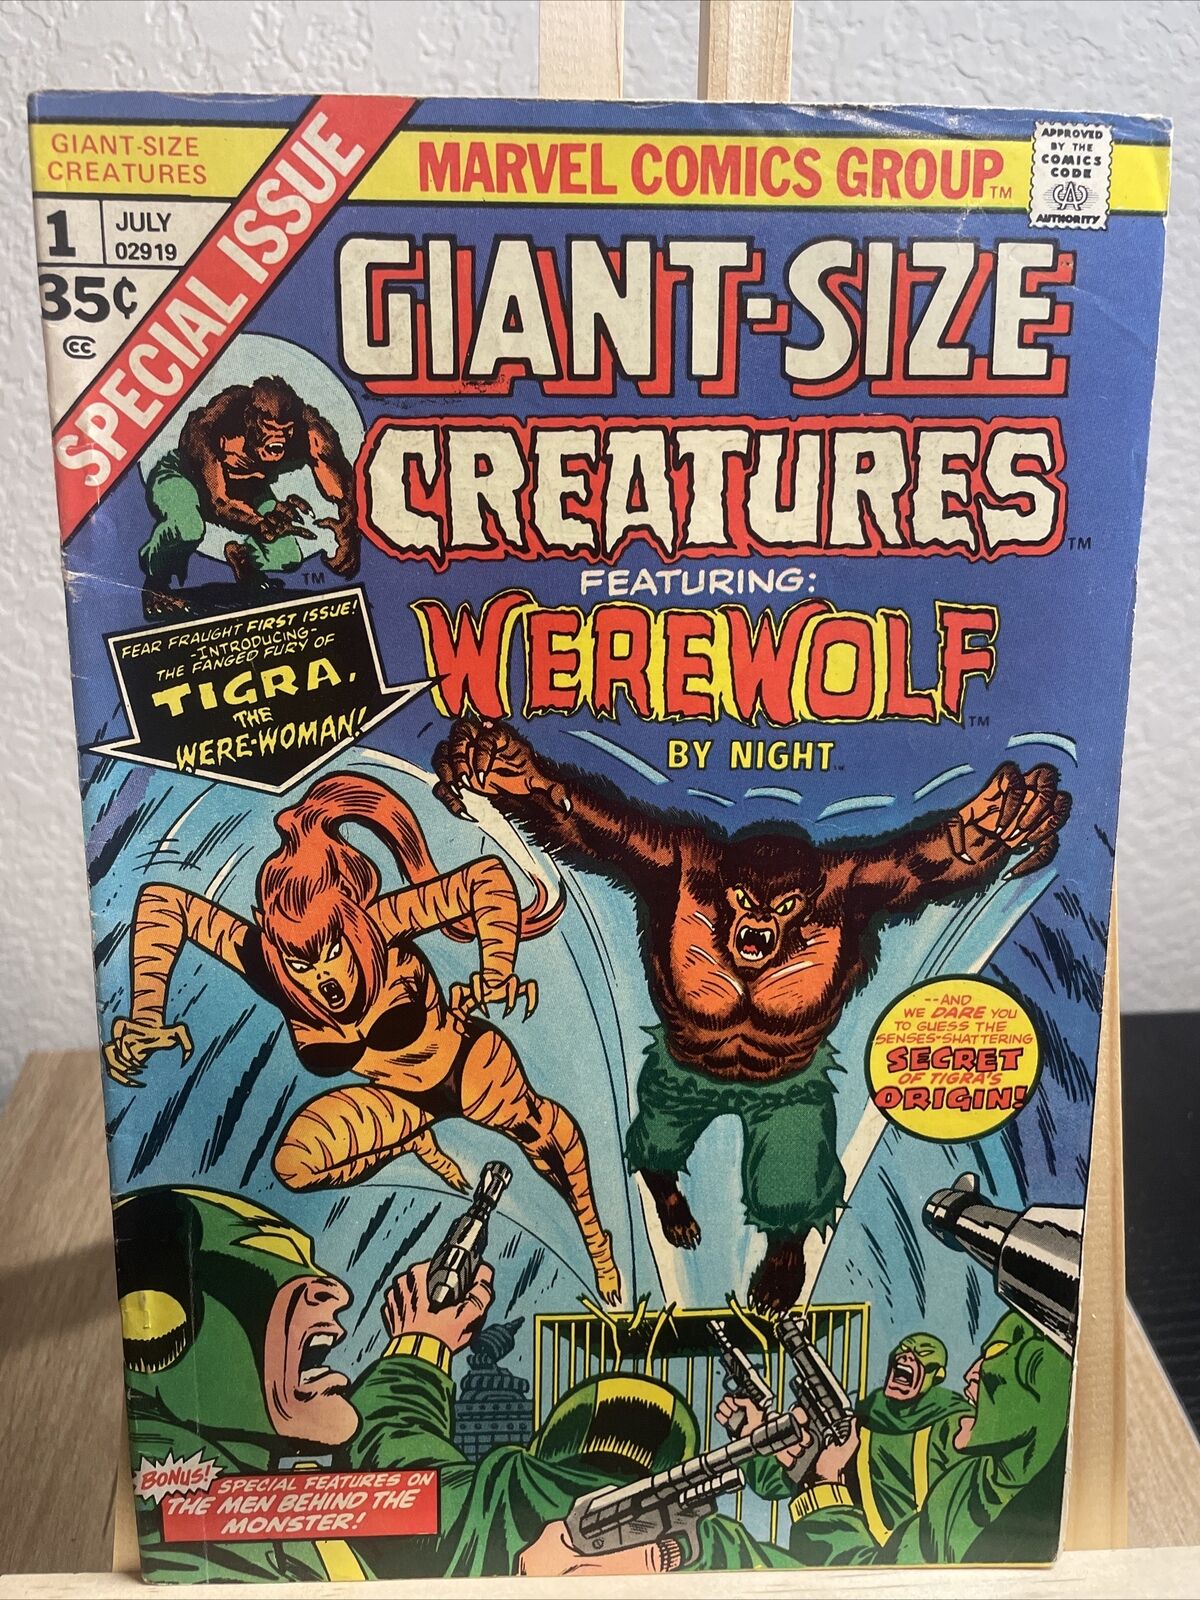 GIANT SIZE CREATURES #1 1974 MARVEL COMICS 1ST APPEARANCE OF TIGRA